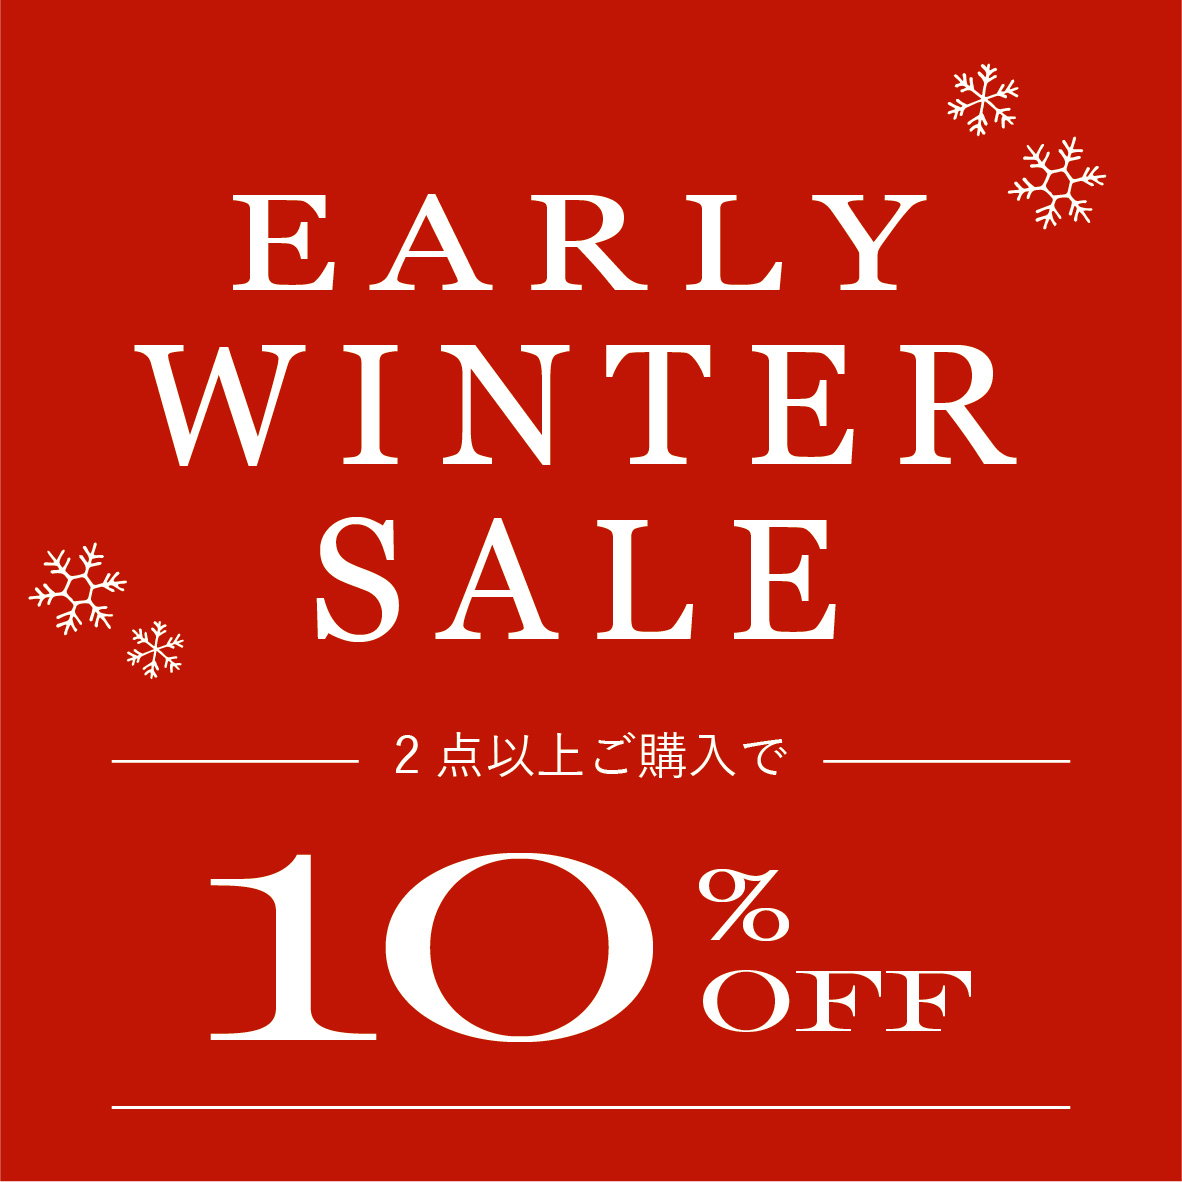 【ROOMDECO 龍ヶ崎店】EARLY WINTER SALEを開催！